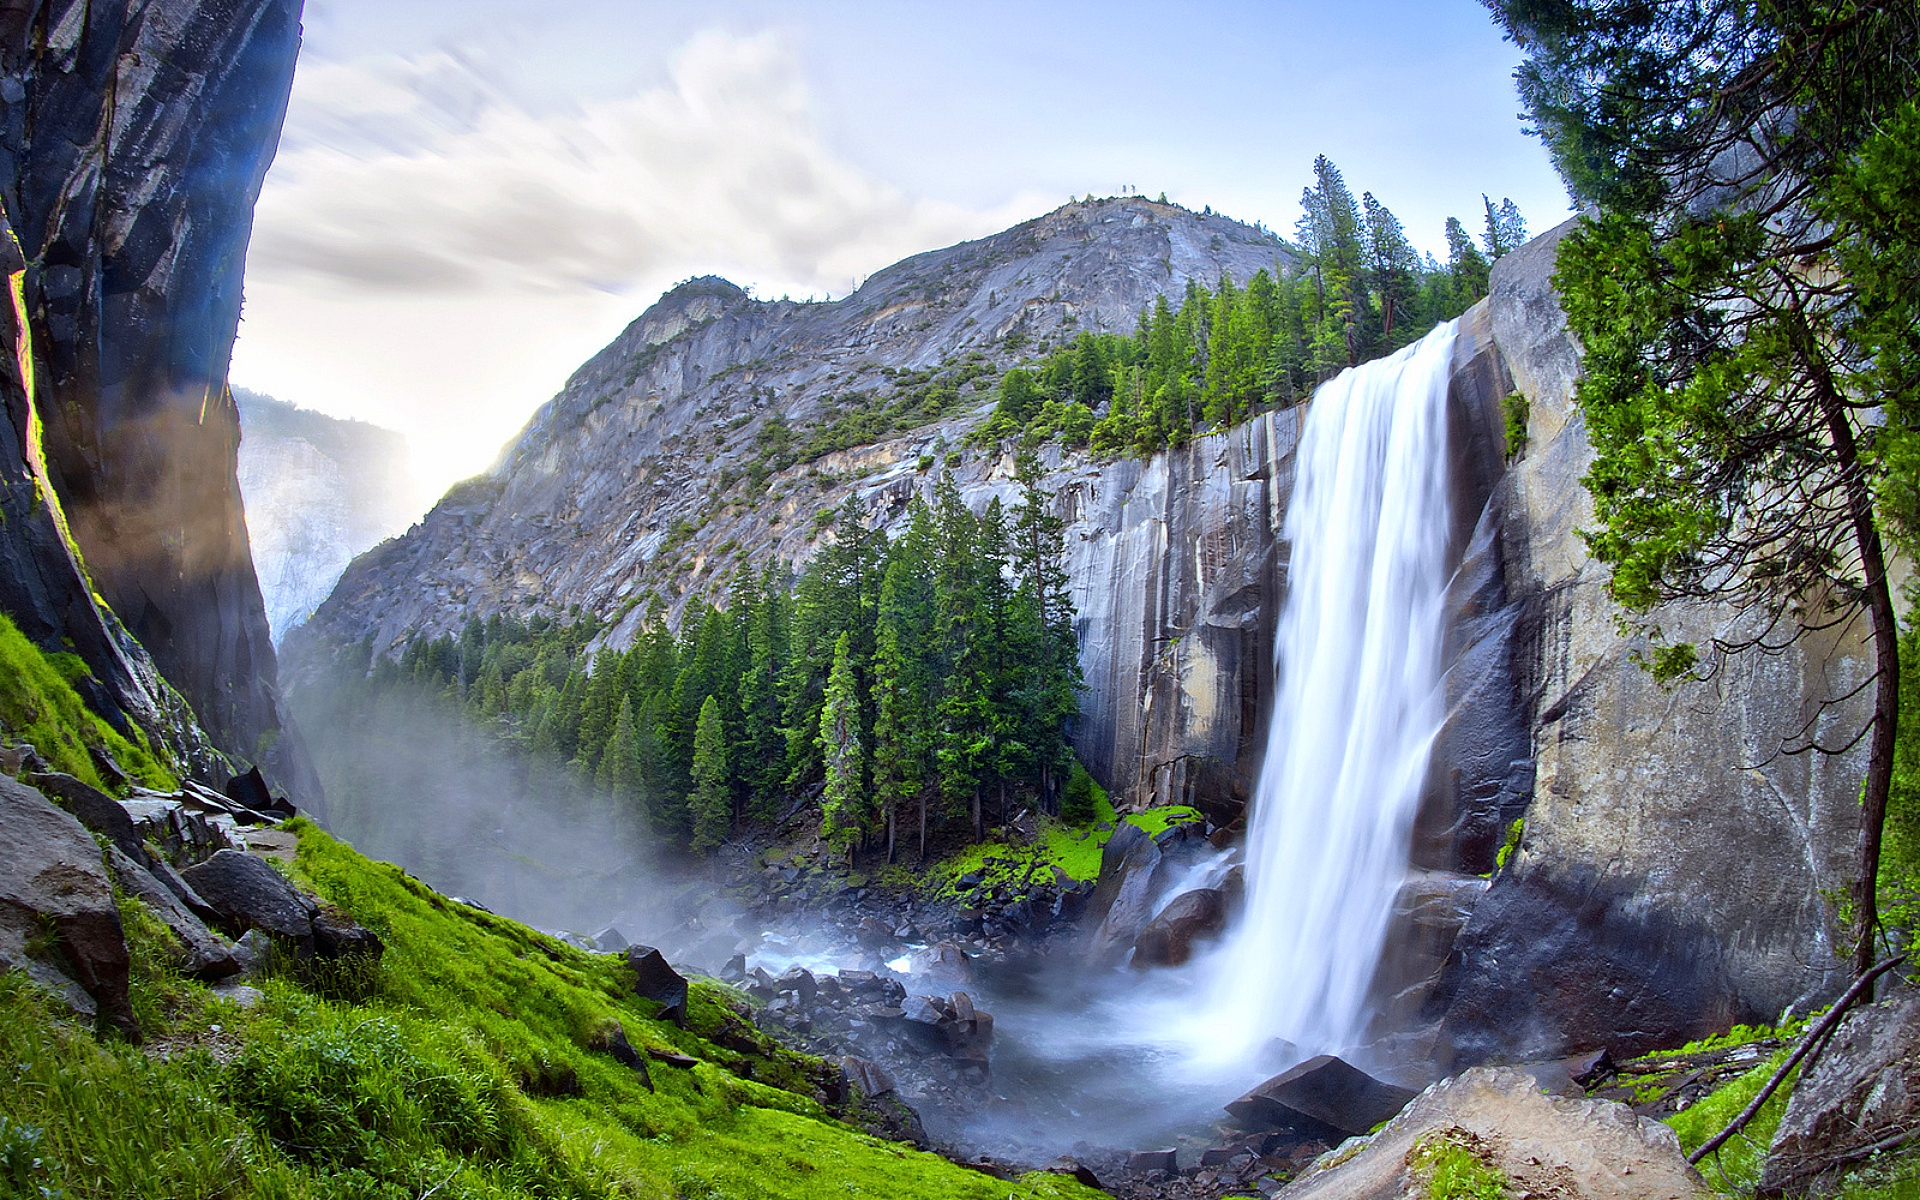 yosemite national park wallpaper,waterfall,natural landscape,nature,body of water,water resources